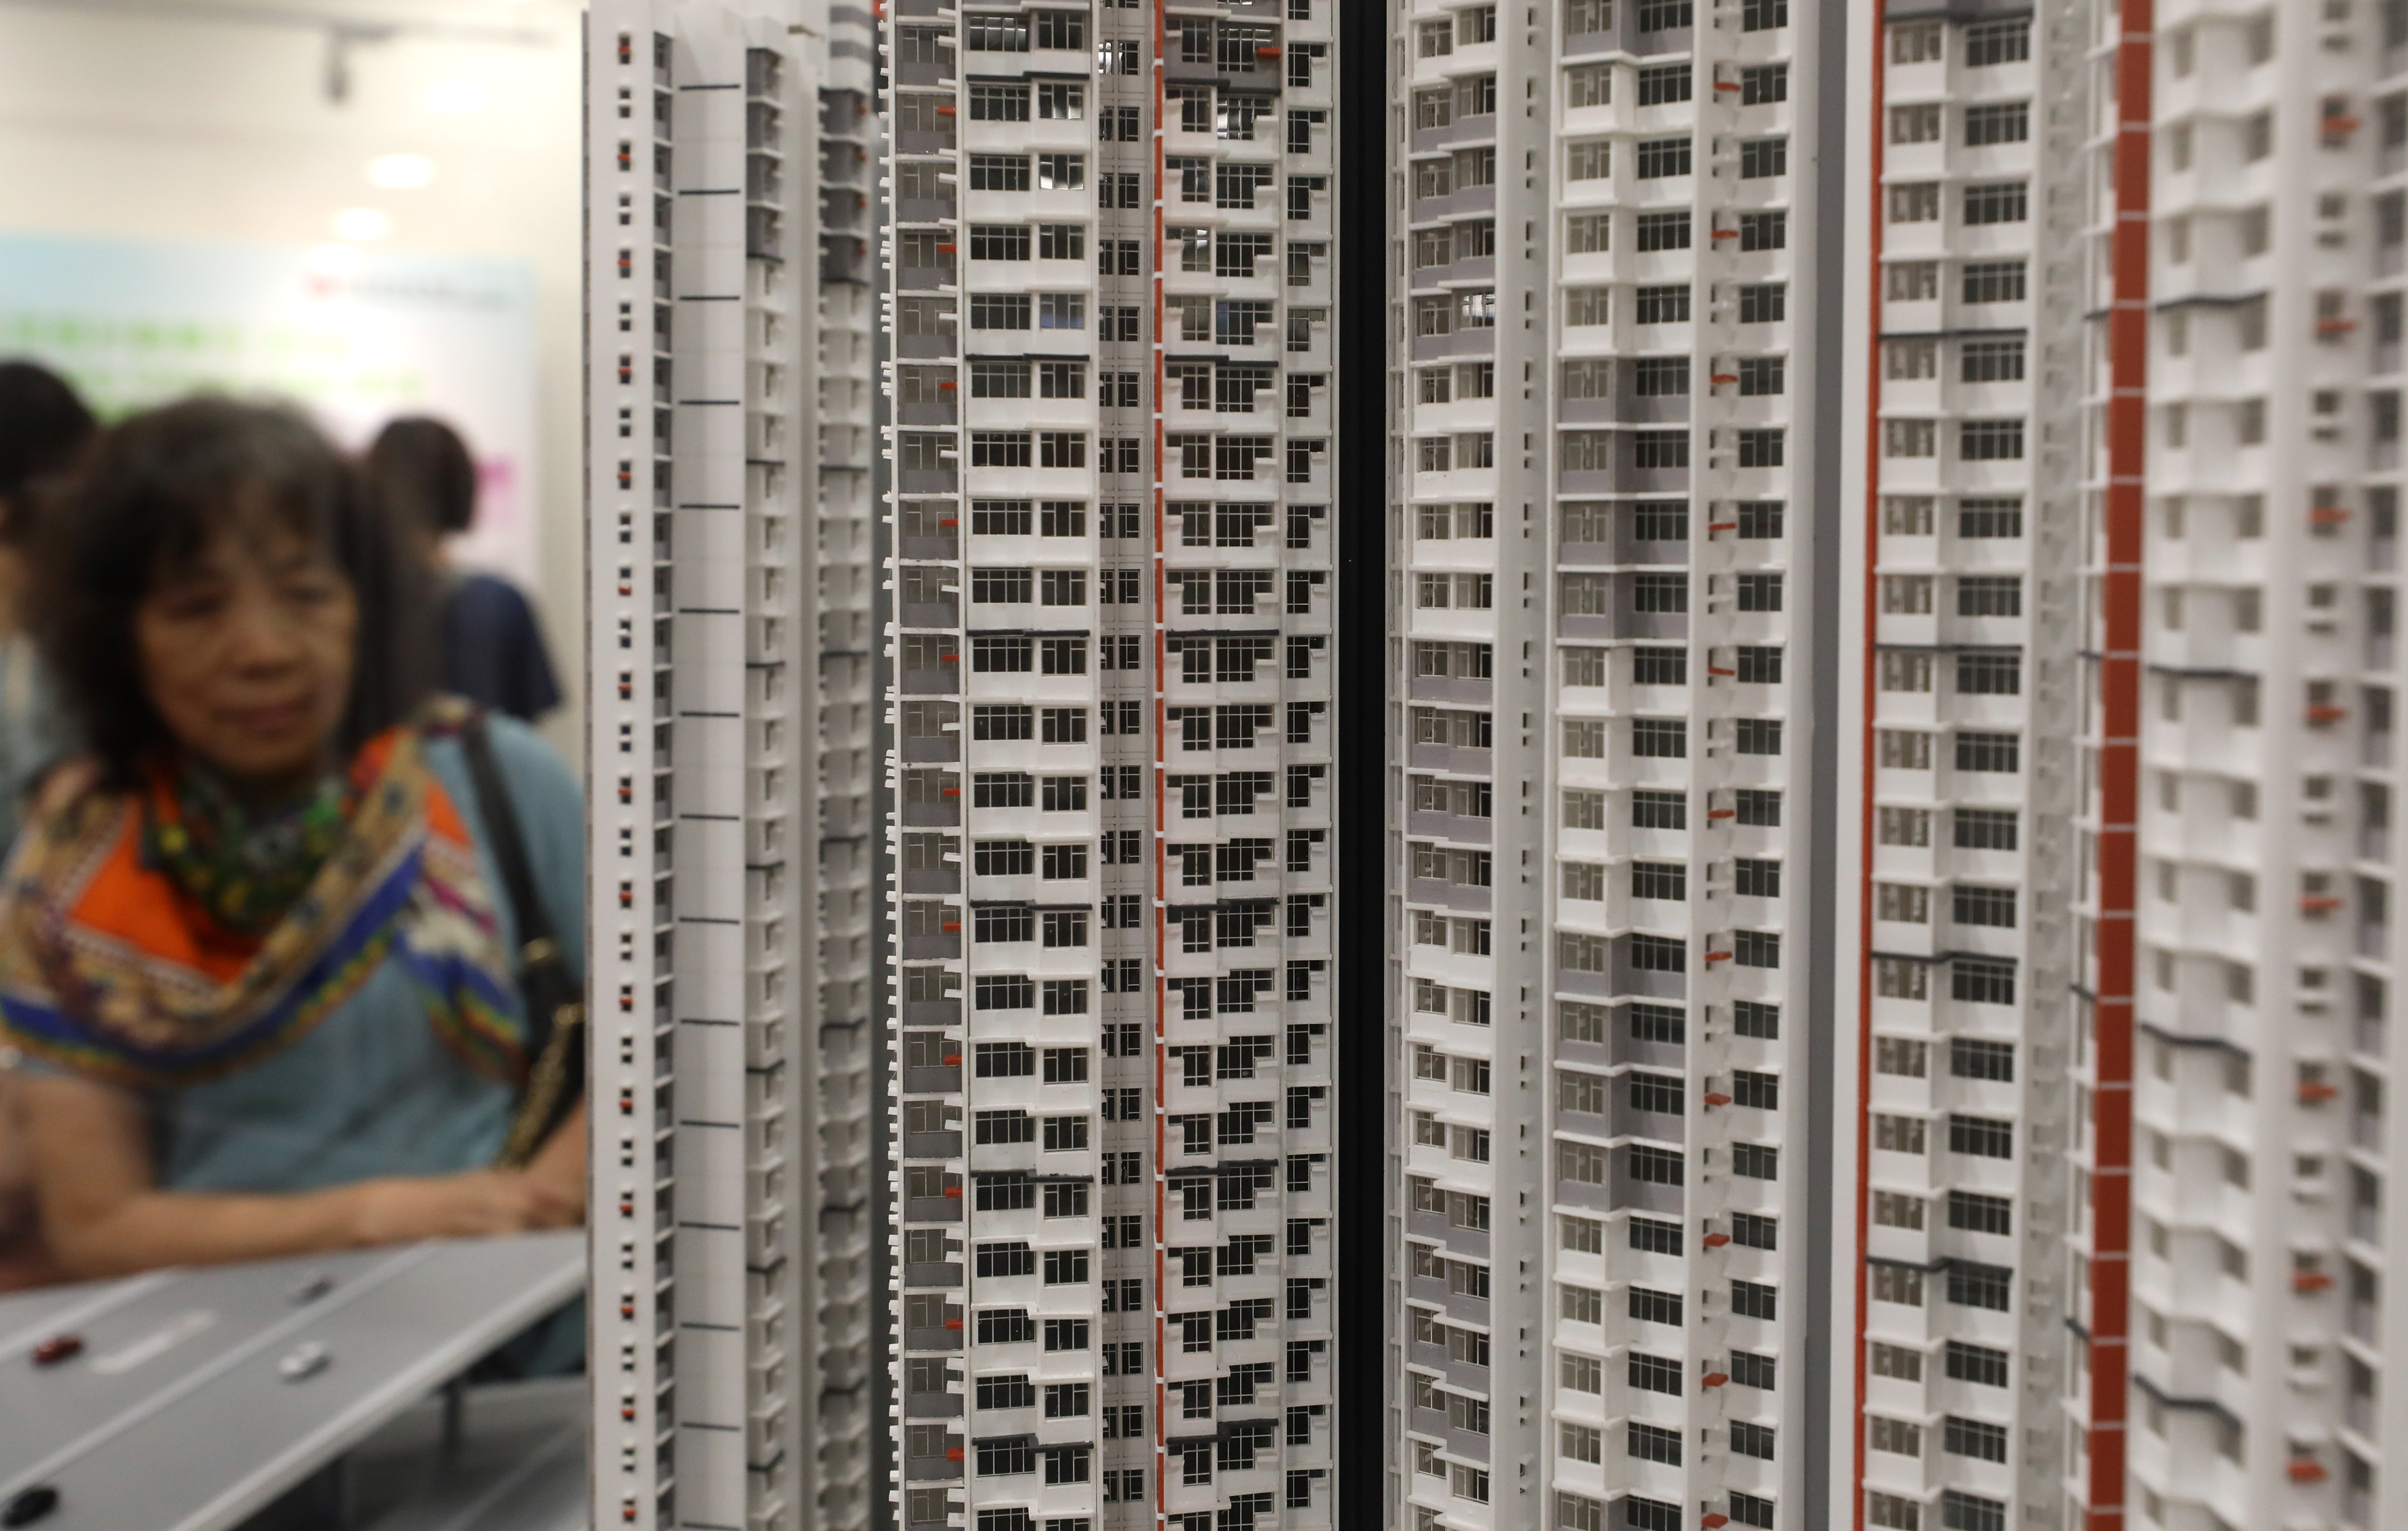 The Hong Kong Housing Society aims to deliver 45,000 flats over the next 20 years. Photo: Dickson Lee